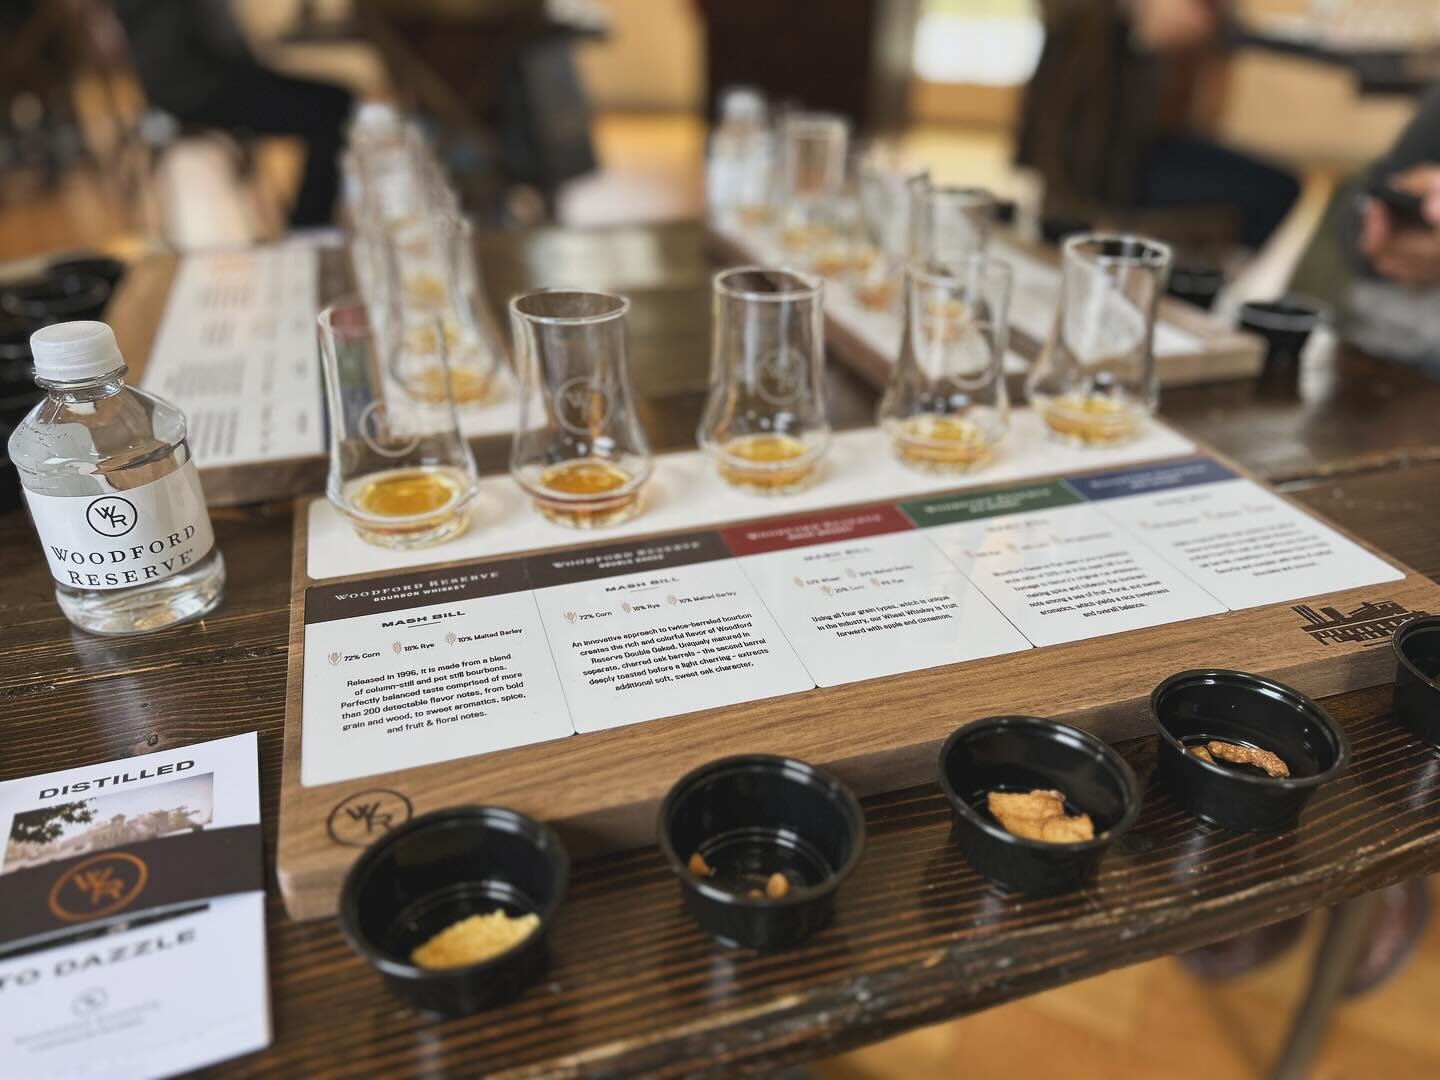 Our final tasting of the trip. Thanks so much Woodford!
#kentuckybourbontrail #bourbon #bourbon-whiskey #liquidgold #bourbongram #whiskey #whisky #whiskeyandwatches #woodfordreserve